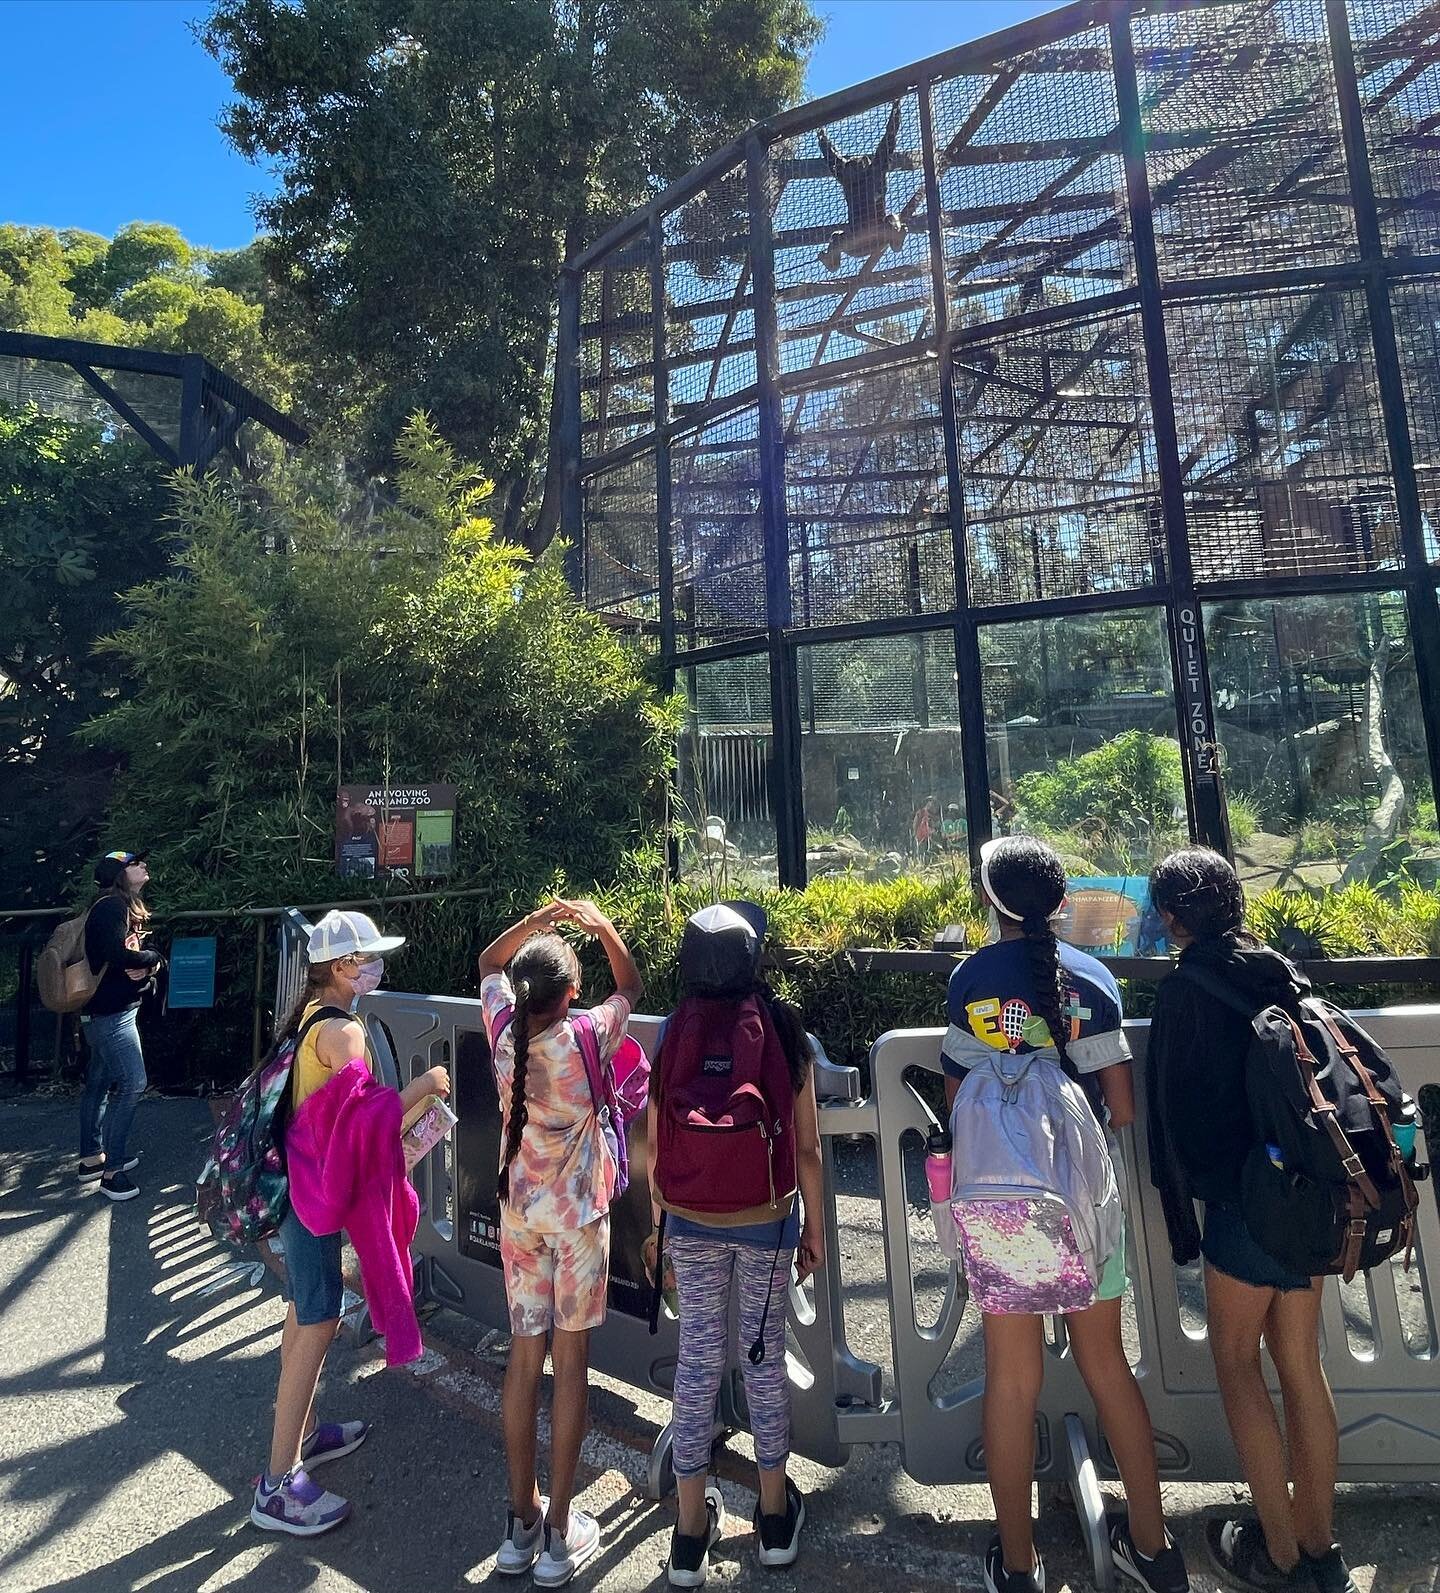 Our kiddos had so much fun today hiking through the African Savanna observing giant elephants and giraffes, watching the playful bears and lazy jaguars on the California Trail, and seeing how the monkeys swung back and forth in the Tropical Rain fore